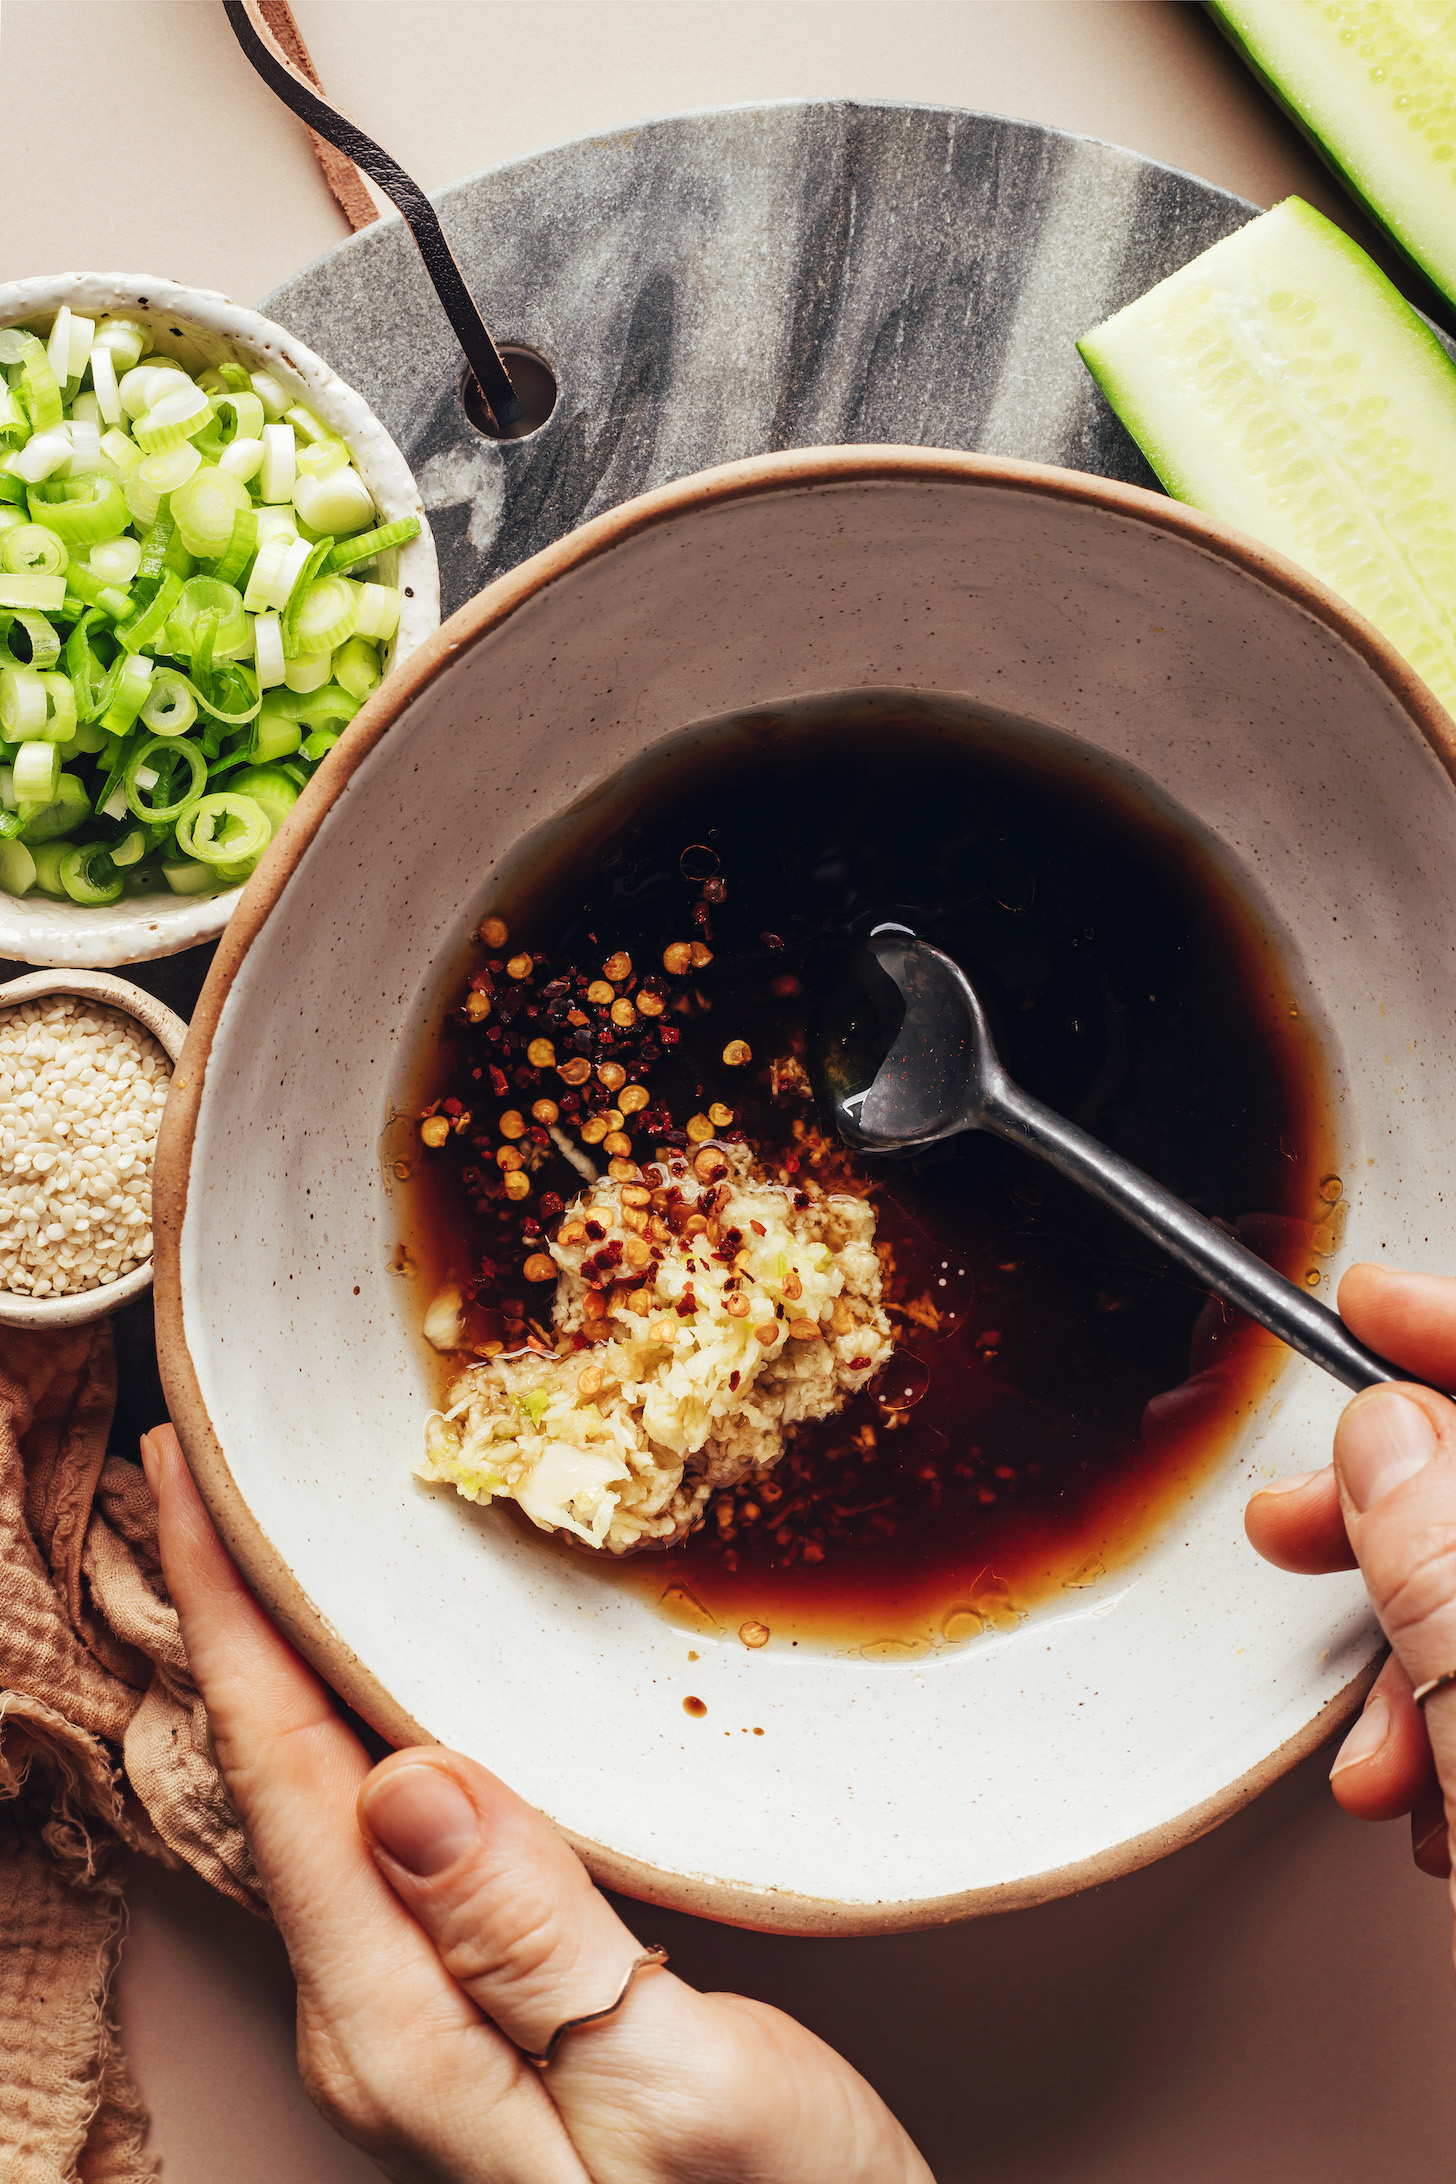 Stirring an Asian-inspired sesame ginger sauce in a bowl